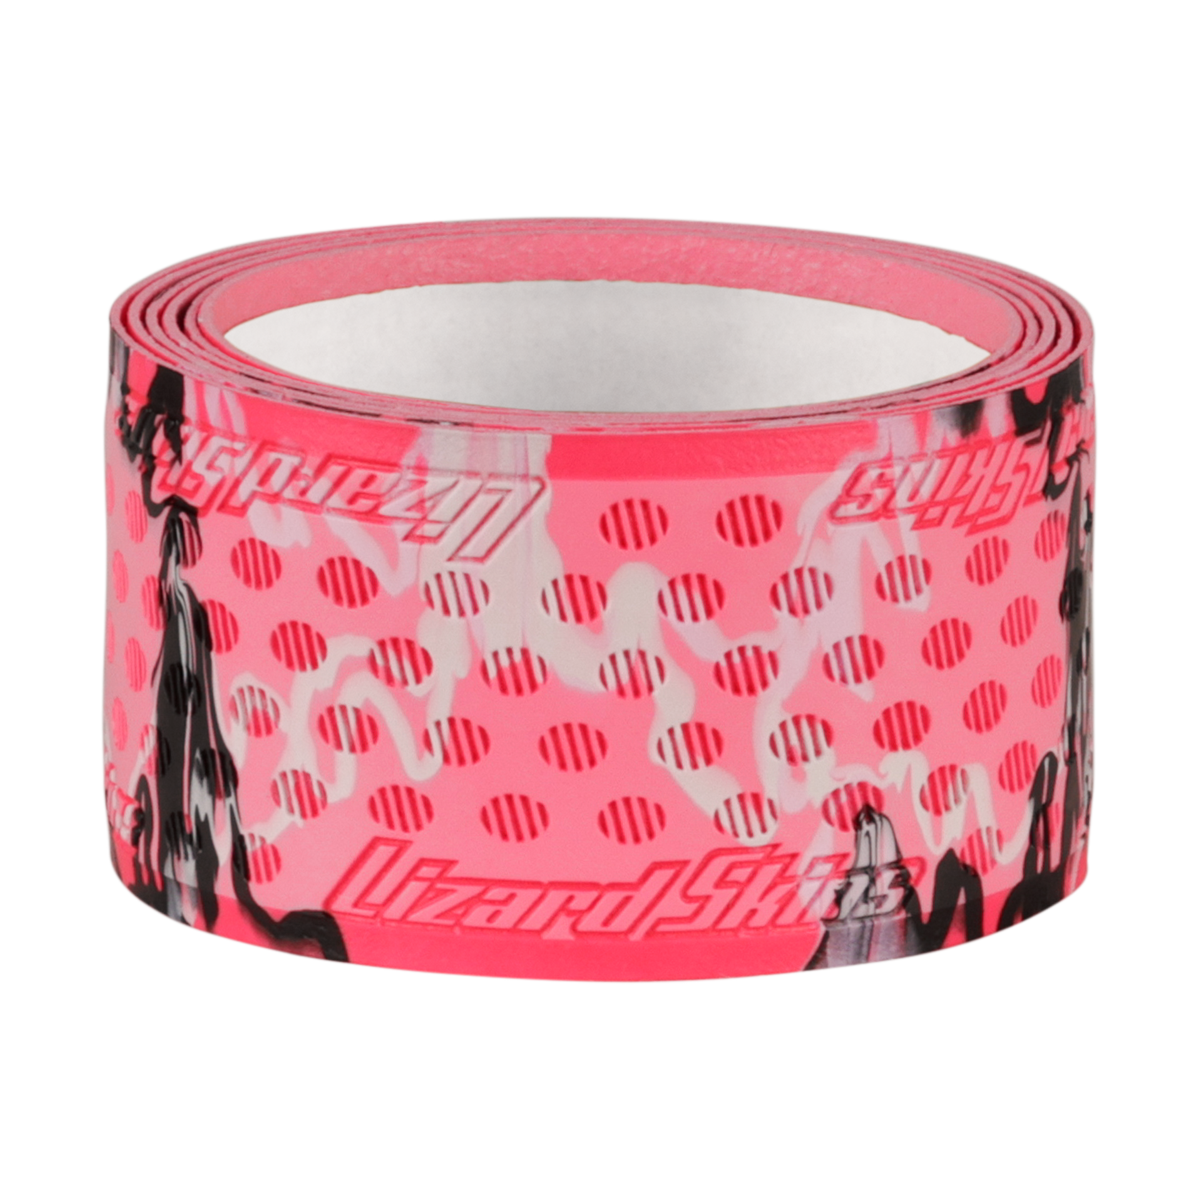 DSP Ultra – Pink Camo